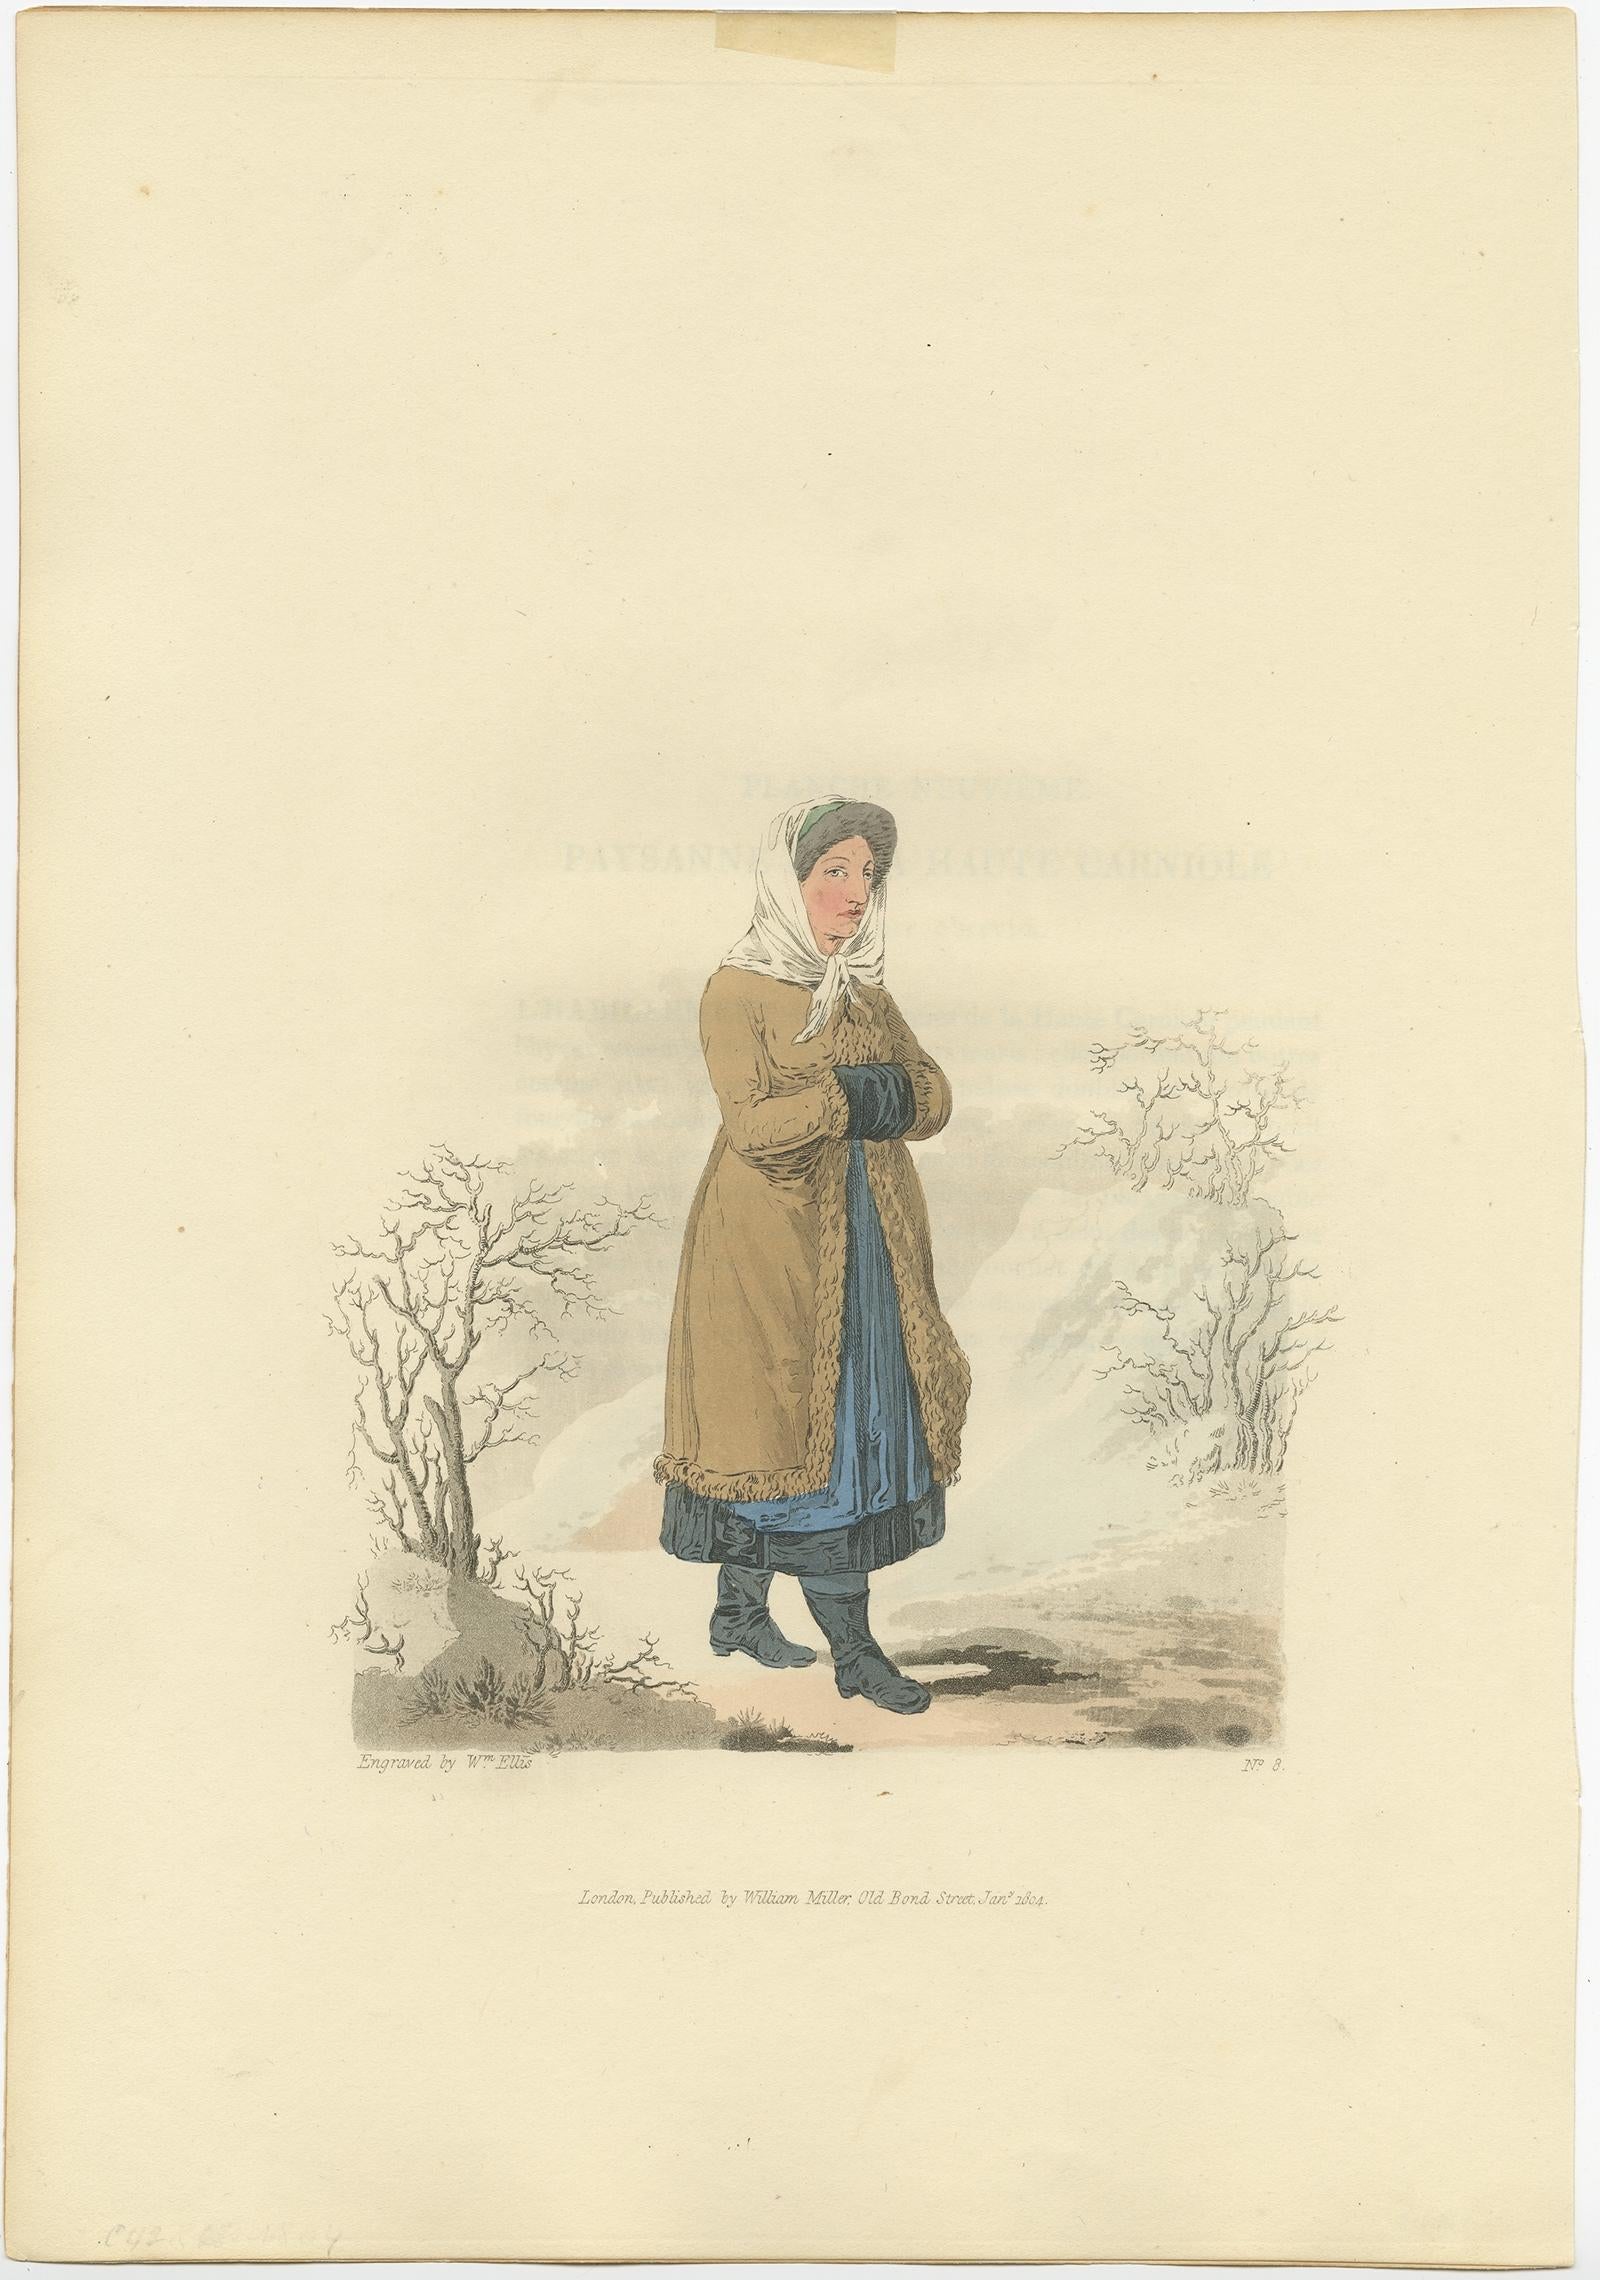 Old print of a countrywoman of Upper Carniola, Slovenia. 

This print originates from 'The Costume of the Hereditary States of the House of Austria' by William Miller. 

Artists and engravers: Engraved by William Ellis.